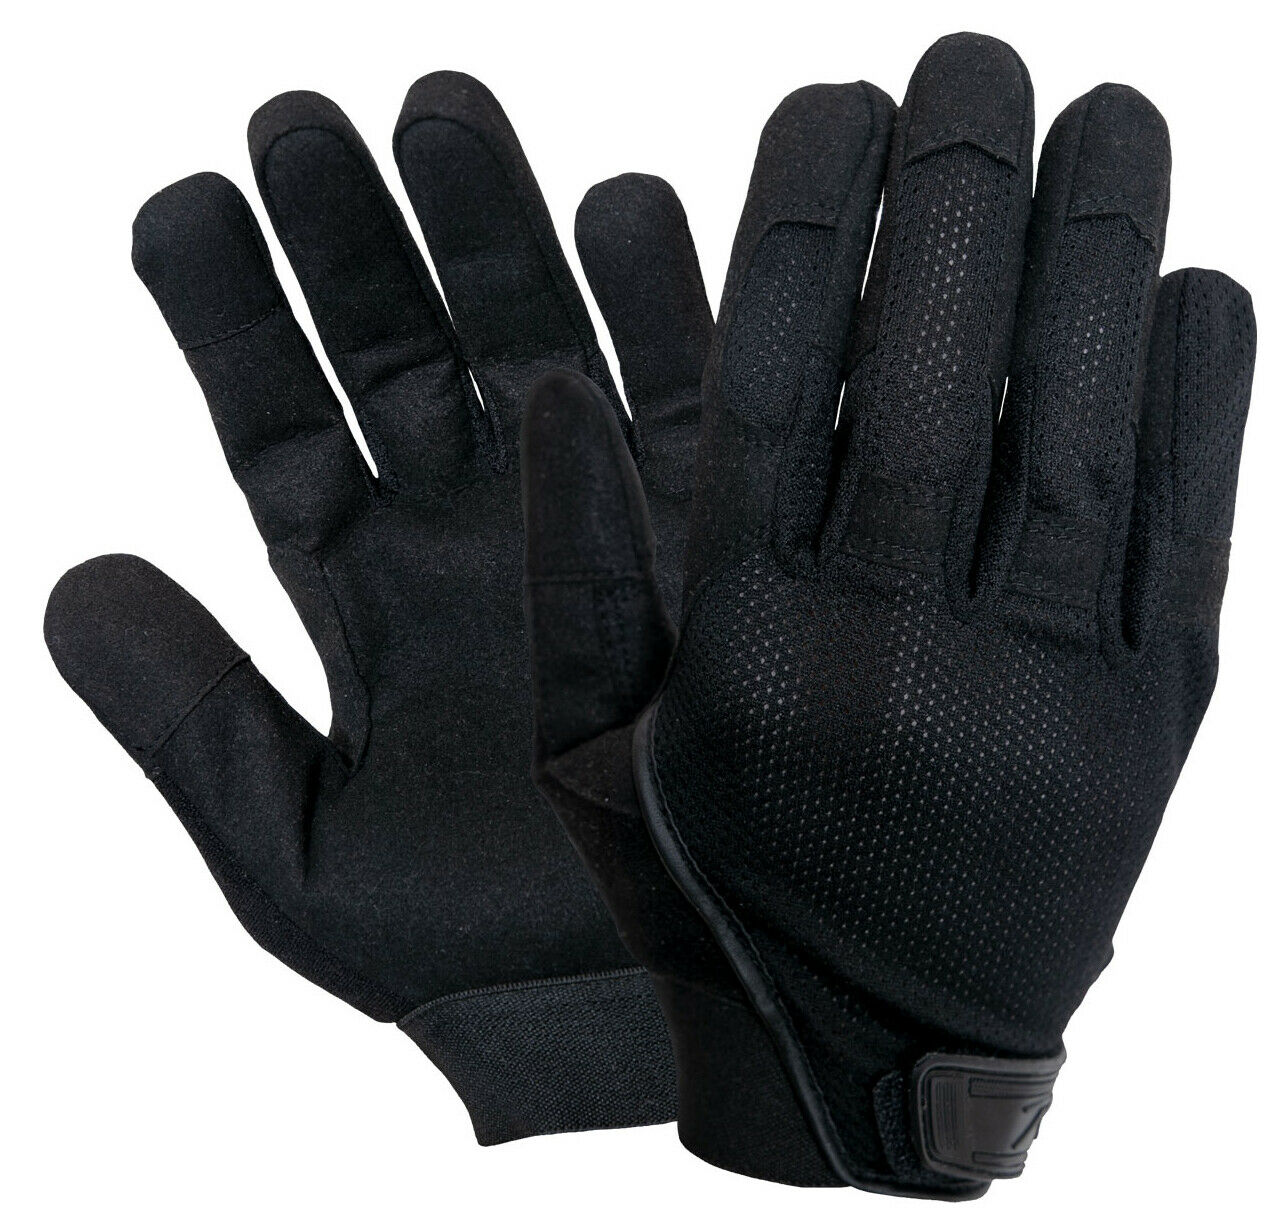 Rothco Lightweight Mesh Tactical Glove - Black